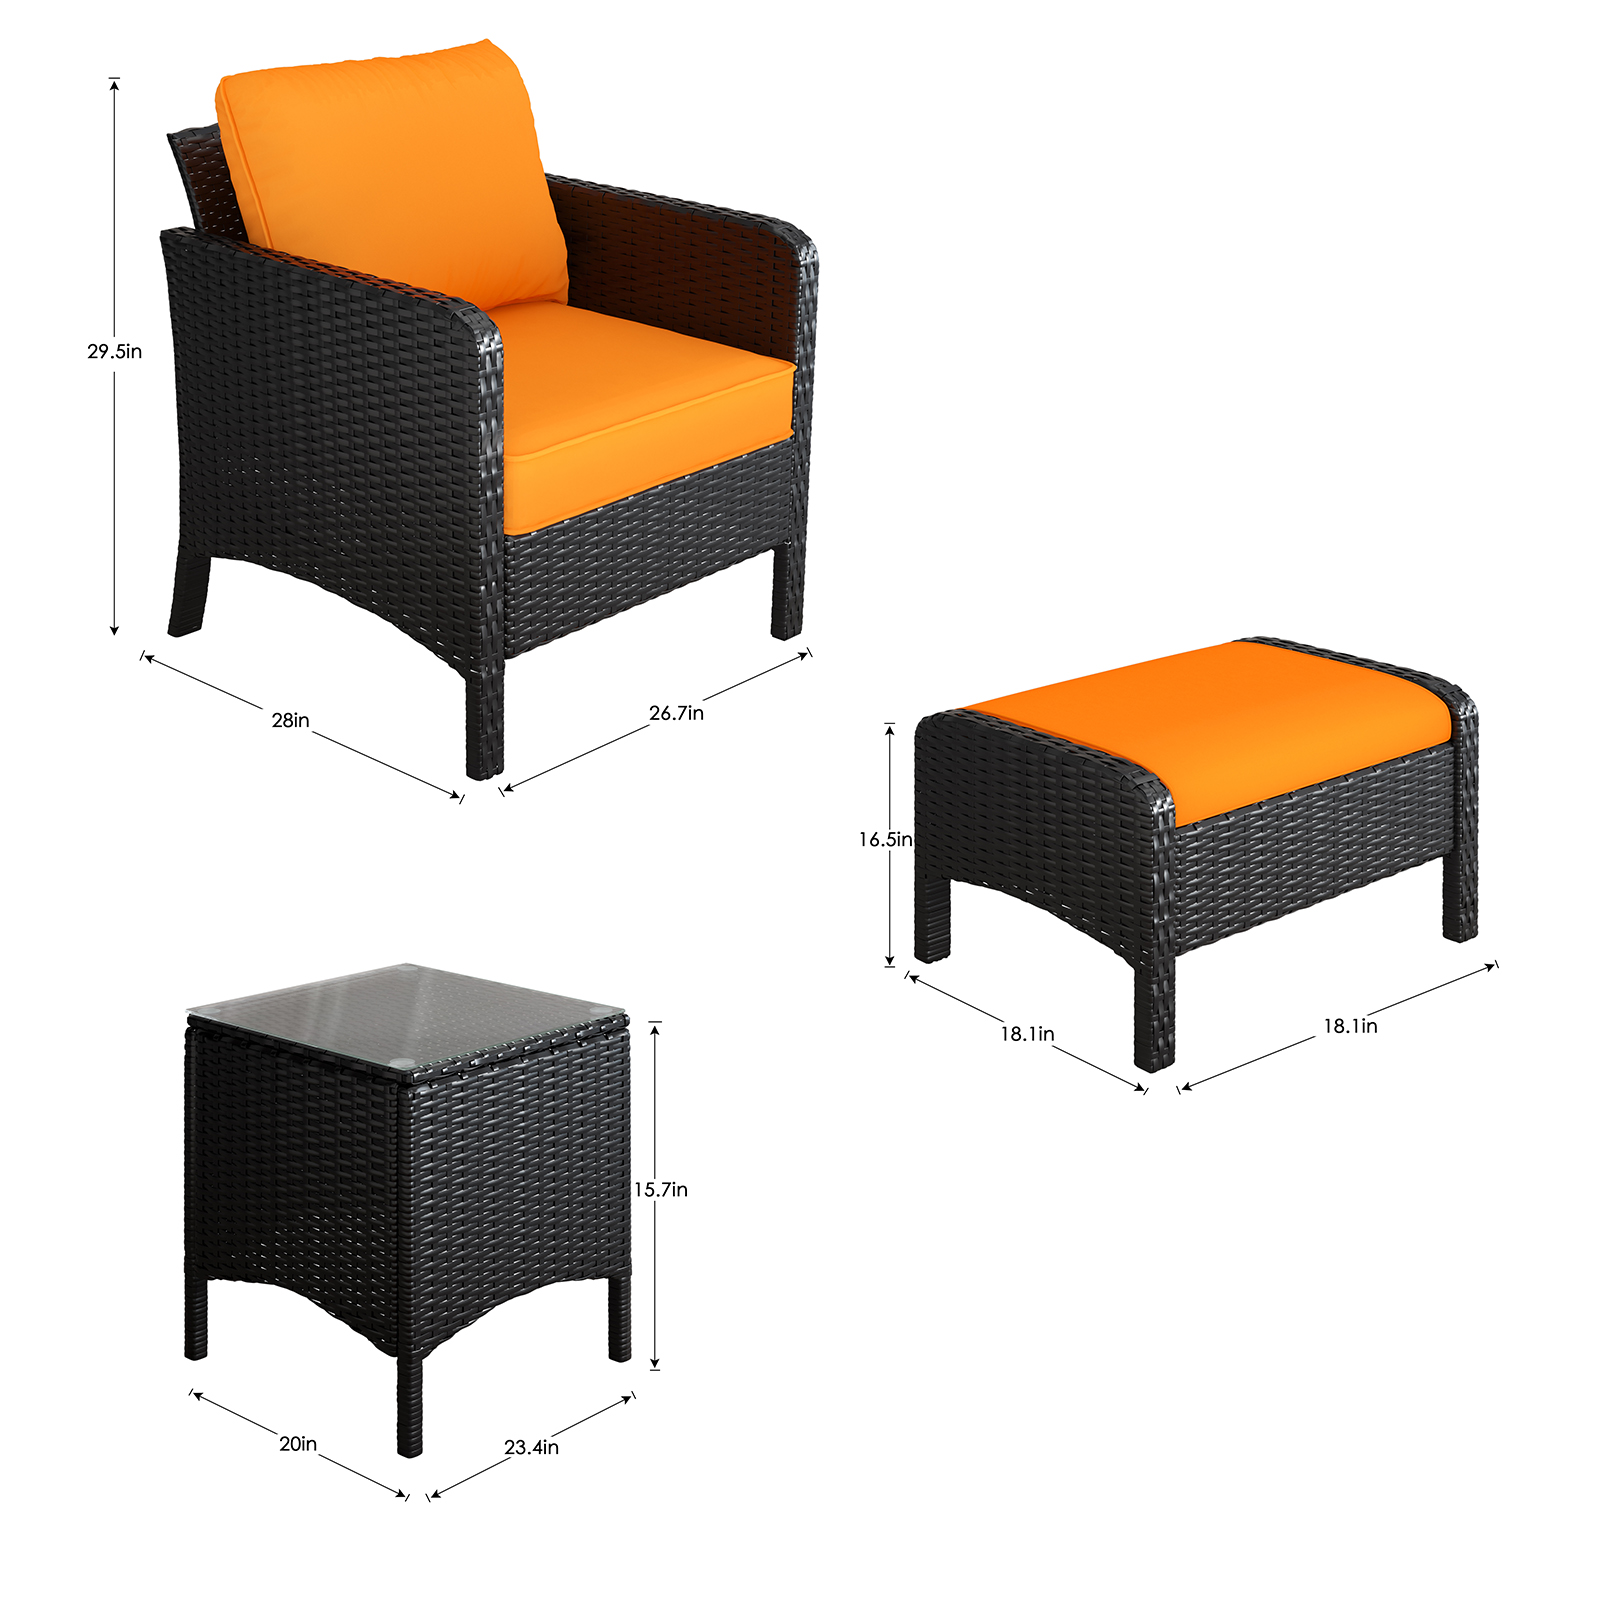 OKVAC 5 Piece Patio Furniture Set Rattan Wicker Chair with Ottomans, Coffee Table - image 5 of 7